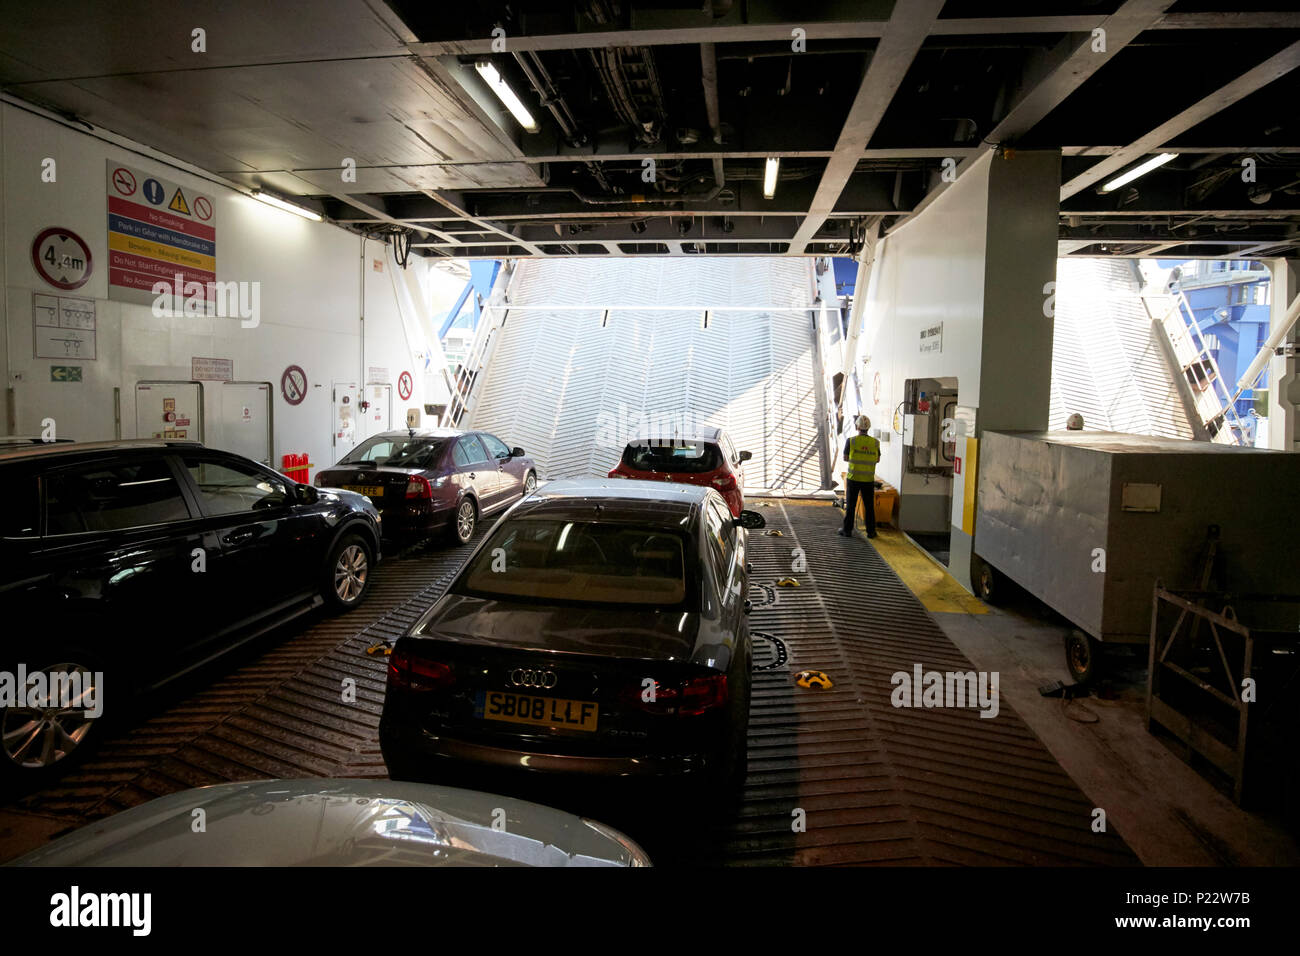 lowering unloading ramps in front of cars on the vehicle deck of an irish sea stena line ferry in the uk Stock Photo